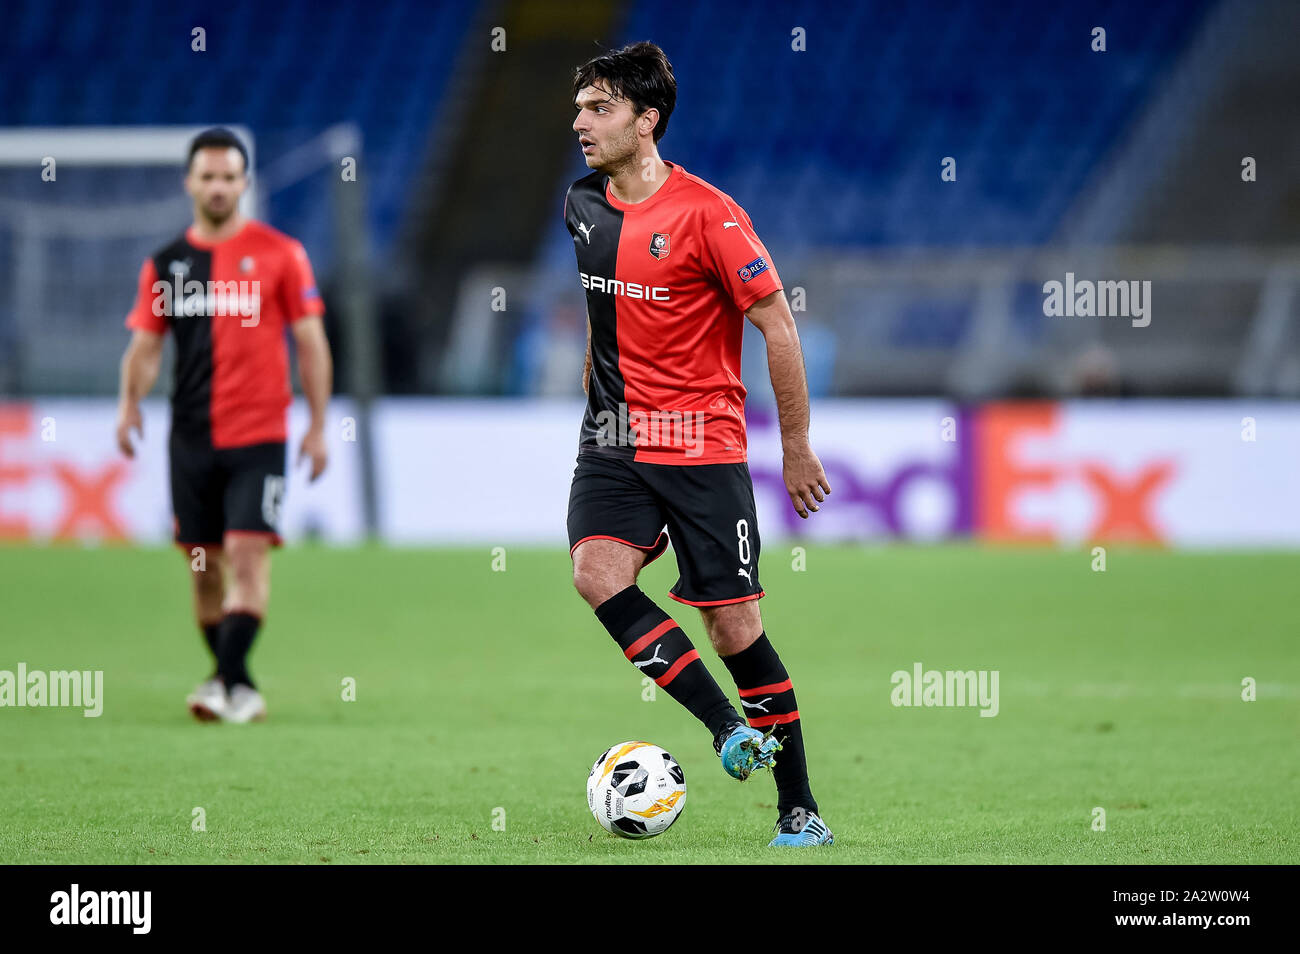 Rome, Italy. 03rd Oct, 2019. Clement Grenier of Rennes during the UEFA Europa League match between Lazio and Rennes at Stadio Olimpico, Rome, Italy on 3 October 2019. Photo by Giuseppe Maffia. Credit: UK Sports Pics Ltd/Alamy Live News Stock Photo